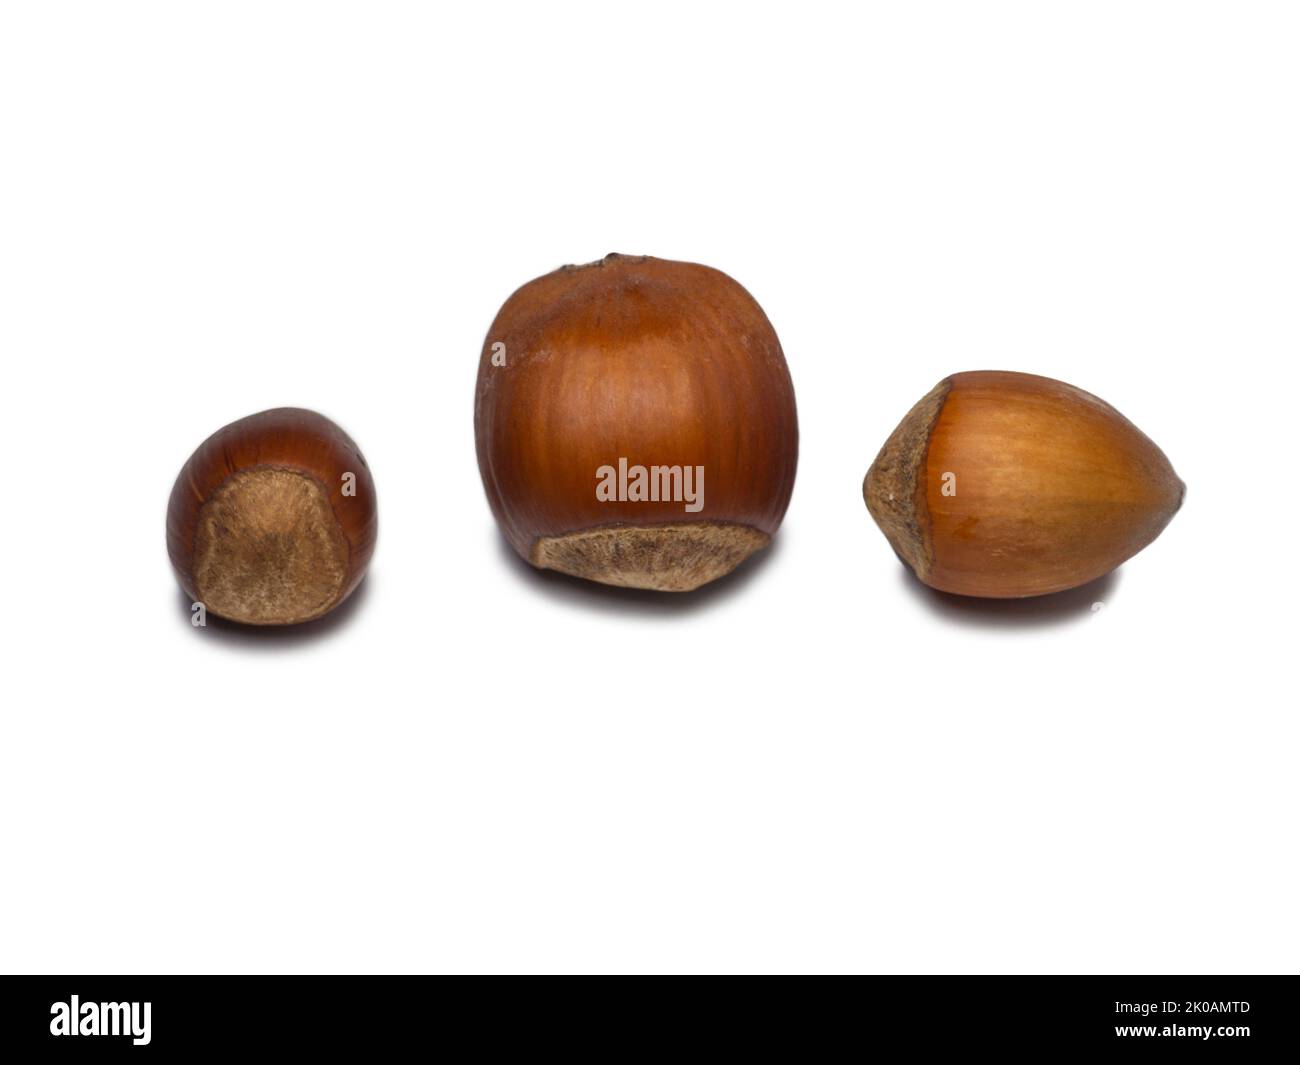 three hazelnuts on a white background. Nuts in shell. Isolate Ingredient for healthy nutrition. unpeeled Stock Photo